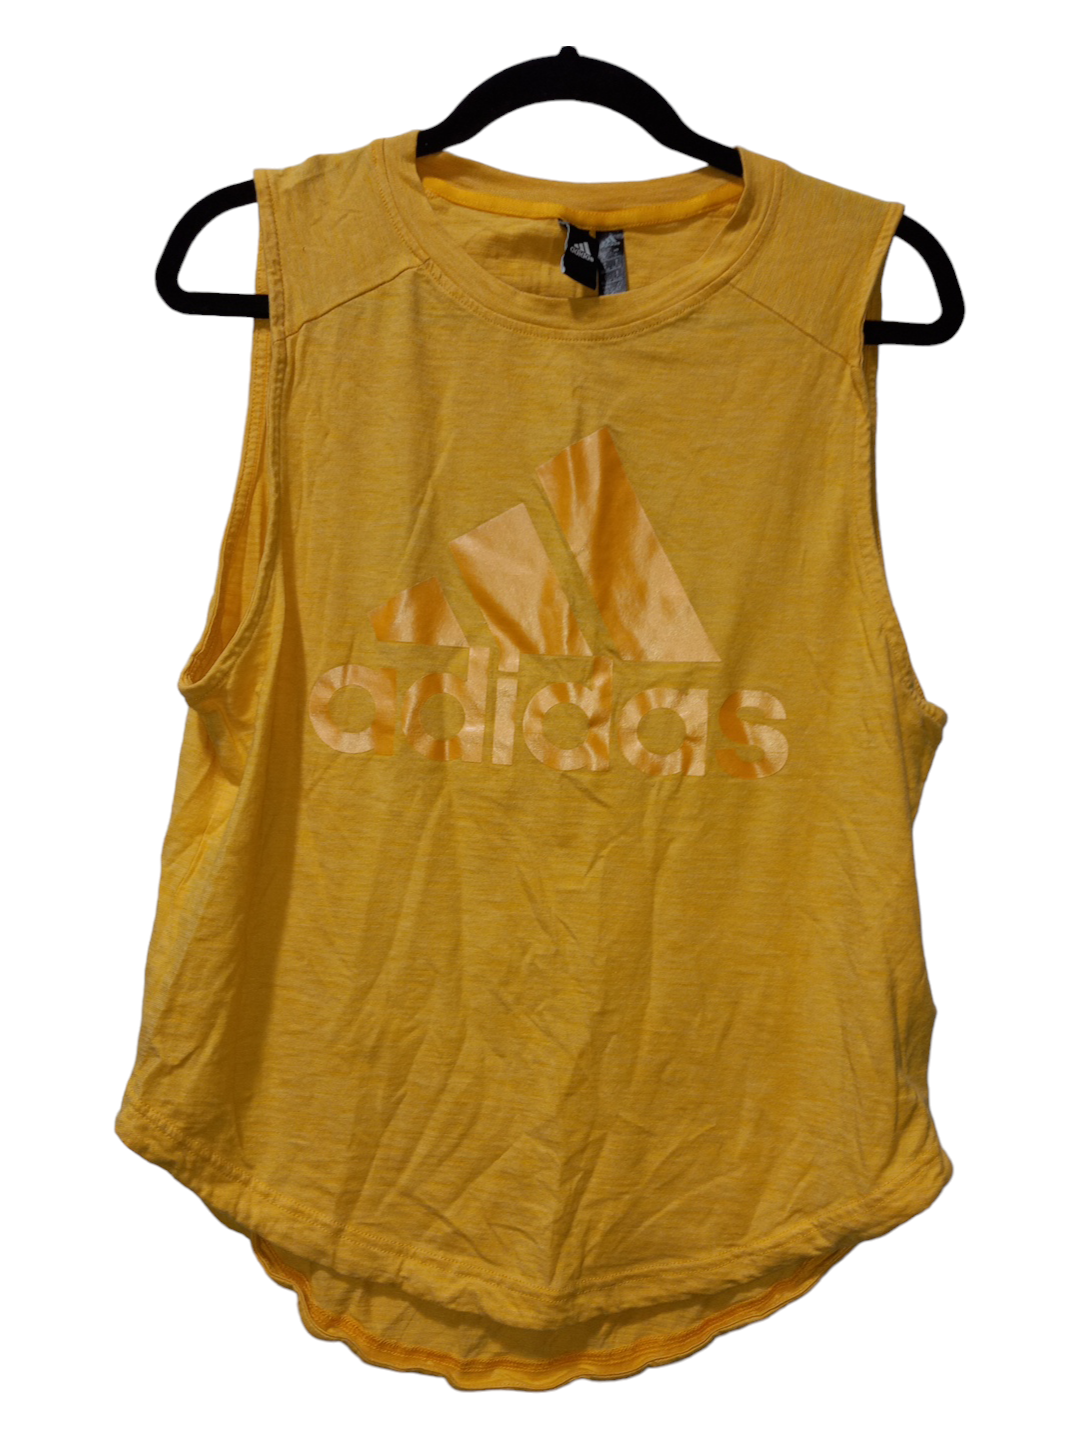 Yellow Athletic Tank Top Adidas, Size S